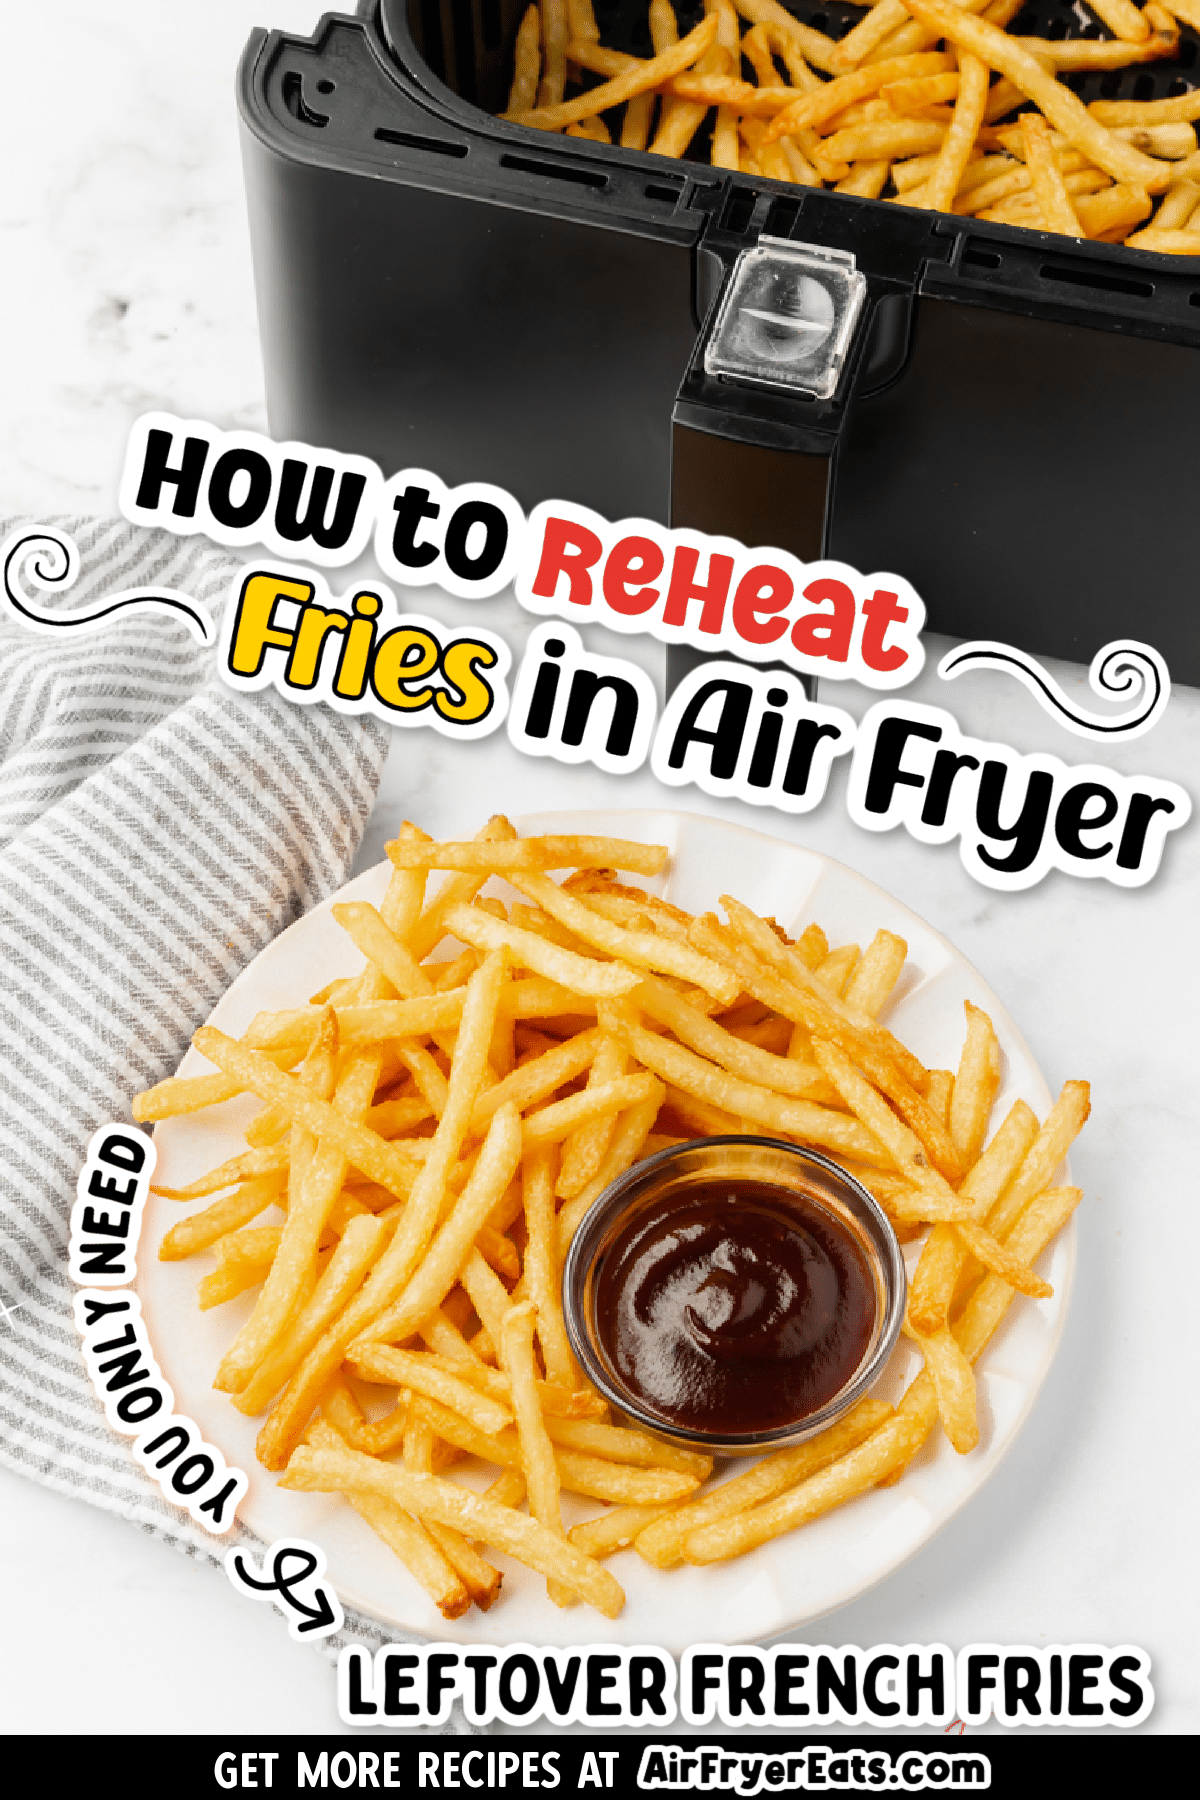 Get all of our best tips and tricks for reheating fries in the air fryer. Learn how to reheat fries in the air fryer, and you'll never have to suffer through cold or microwaved french fries again! via @vegetarianmamma